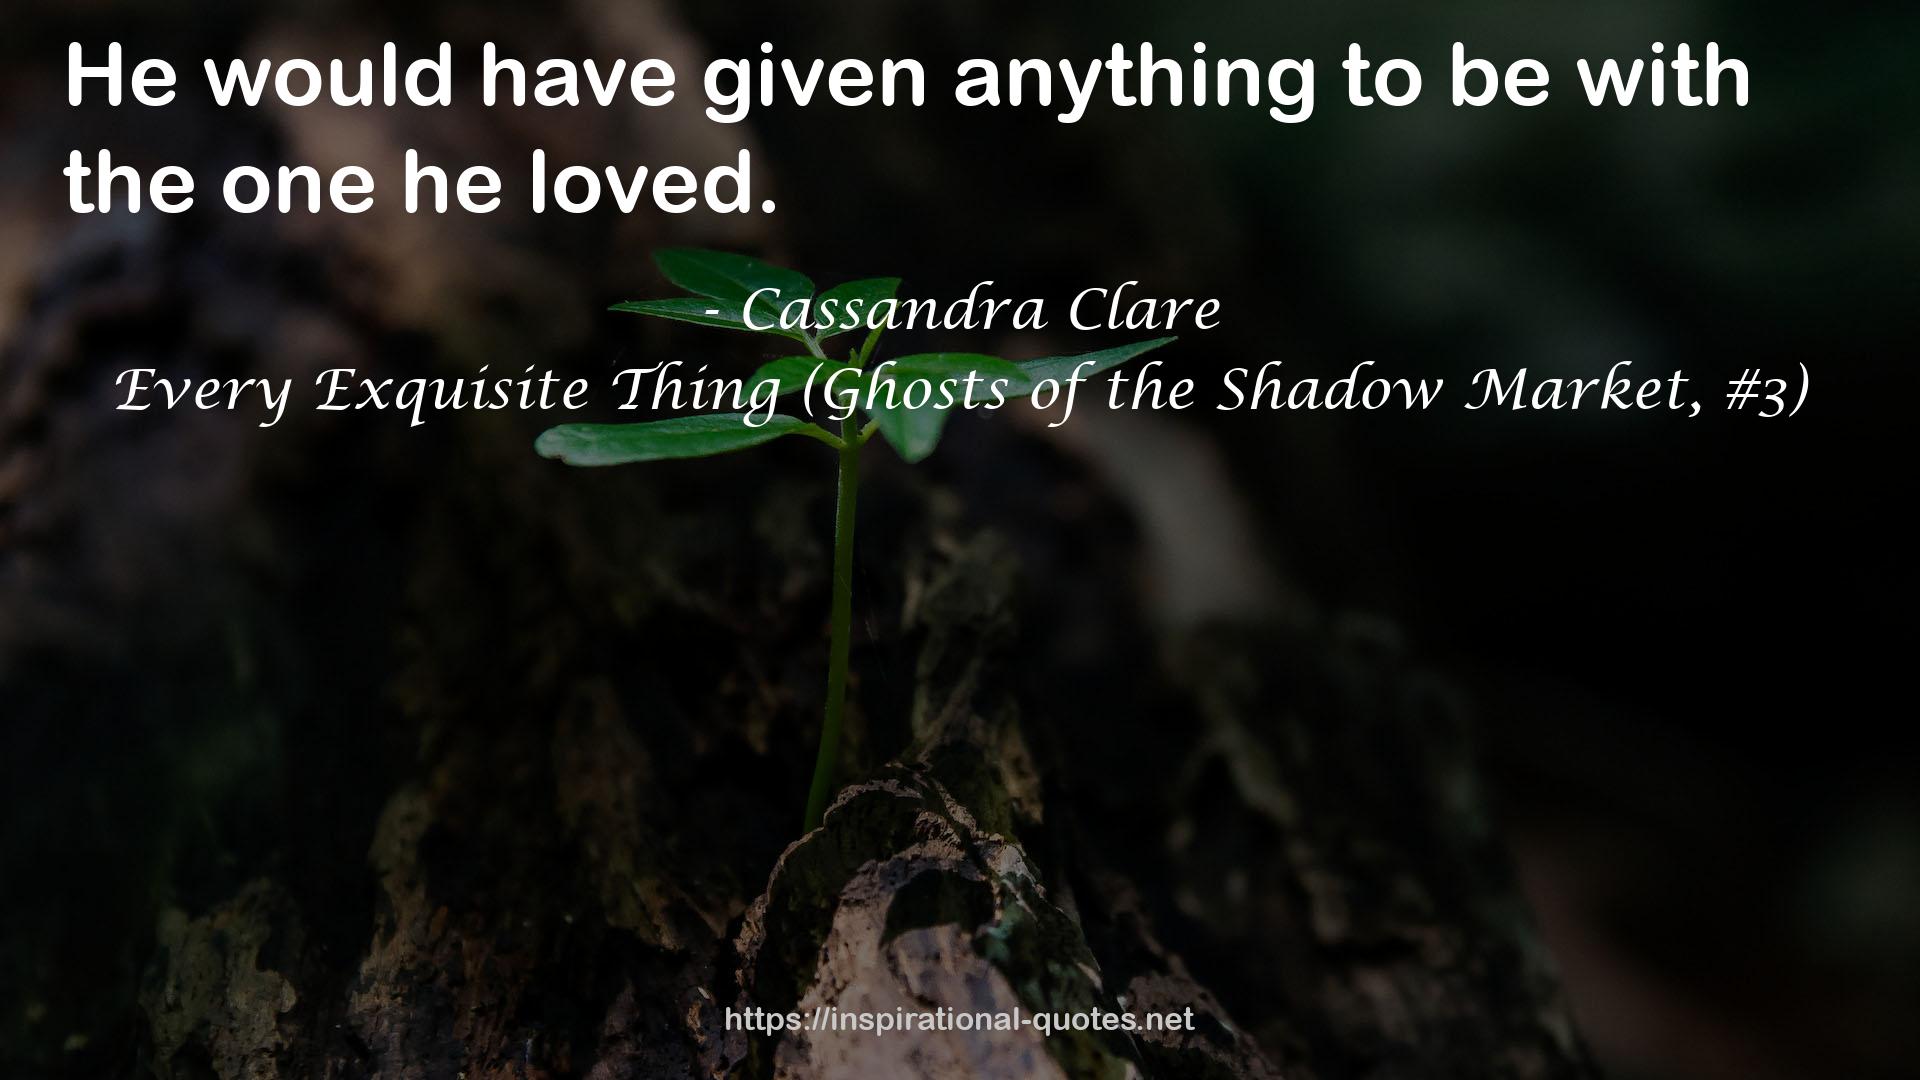 Every Exquisite Thing (Ghosts of the Shadow Market, #3) QUOTES